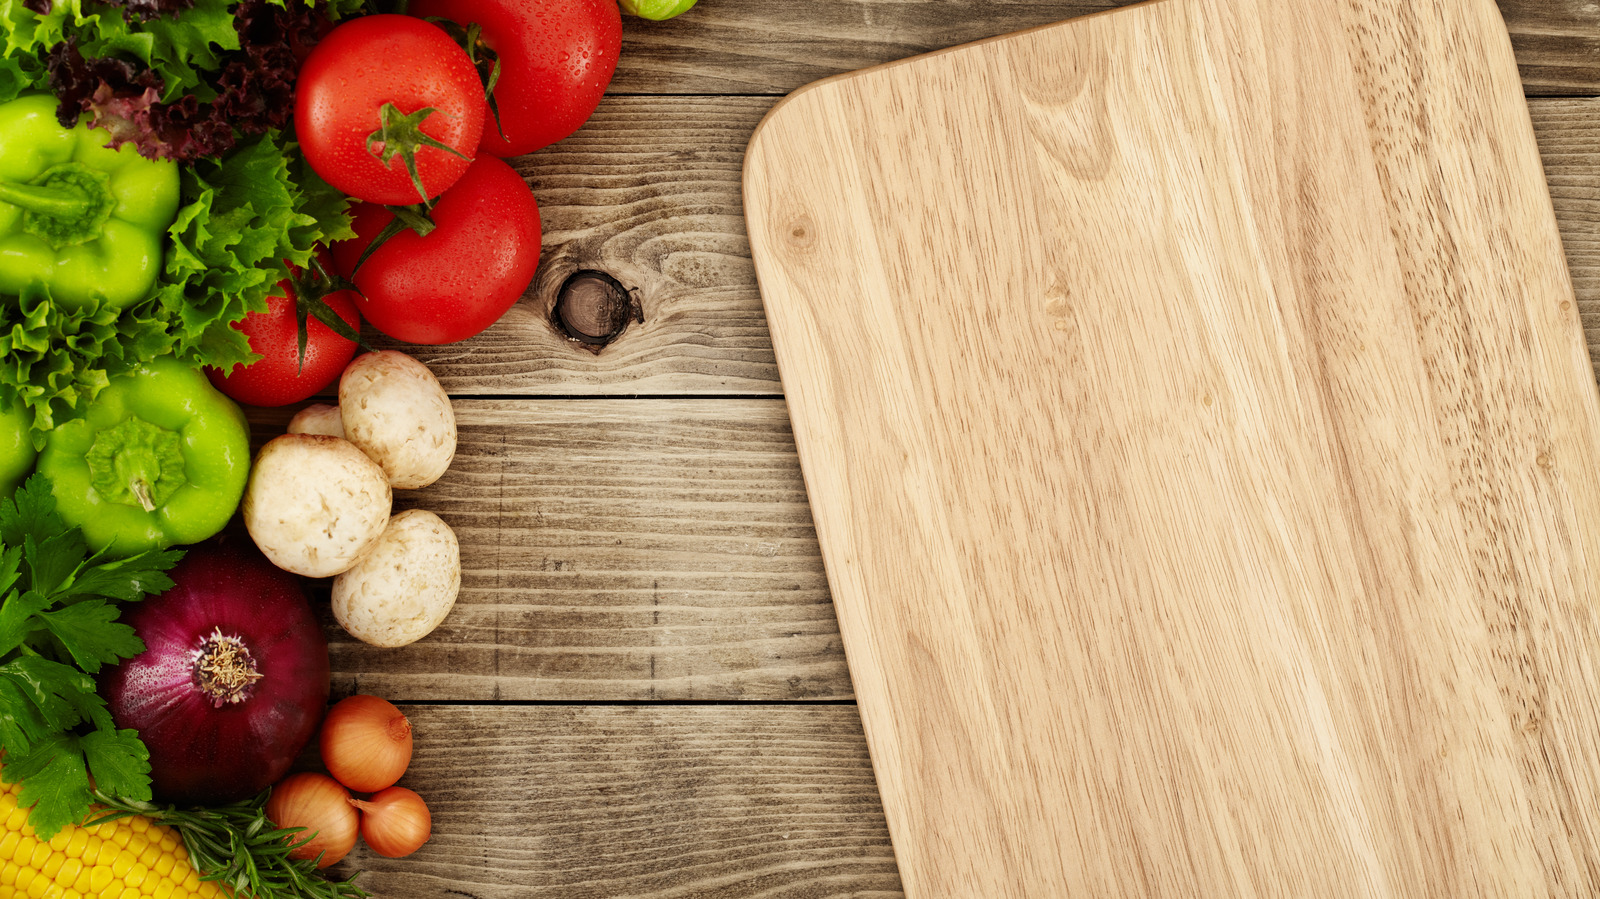 Why You Shouldn't Substitute Mineral Oil For Your Wood Cutting Board